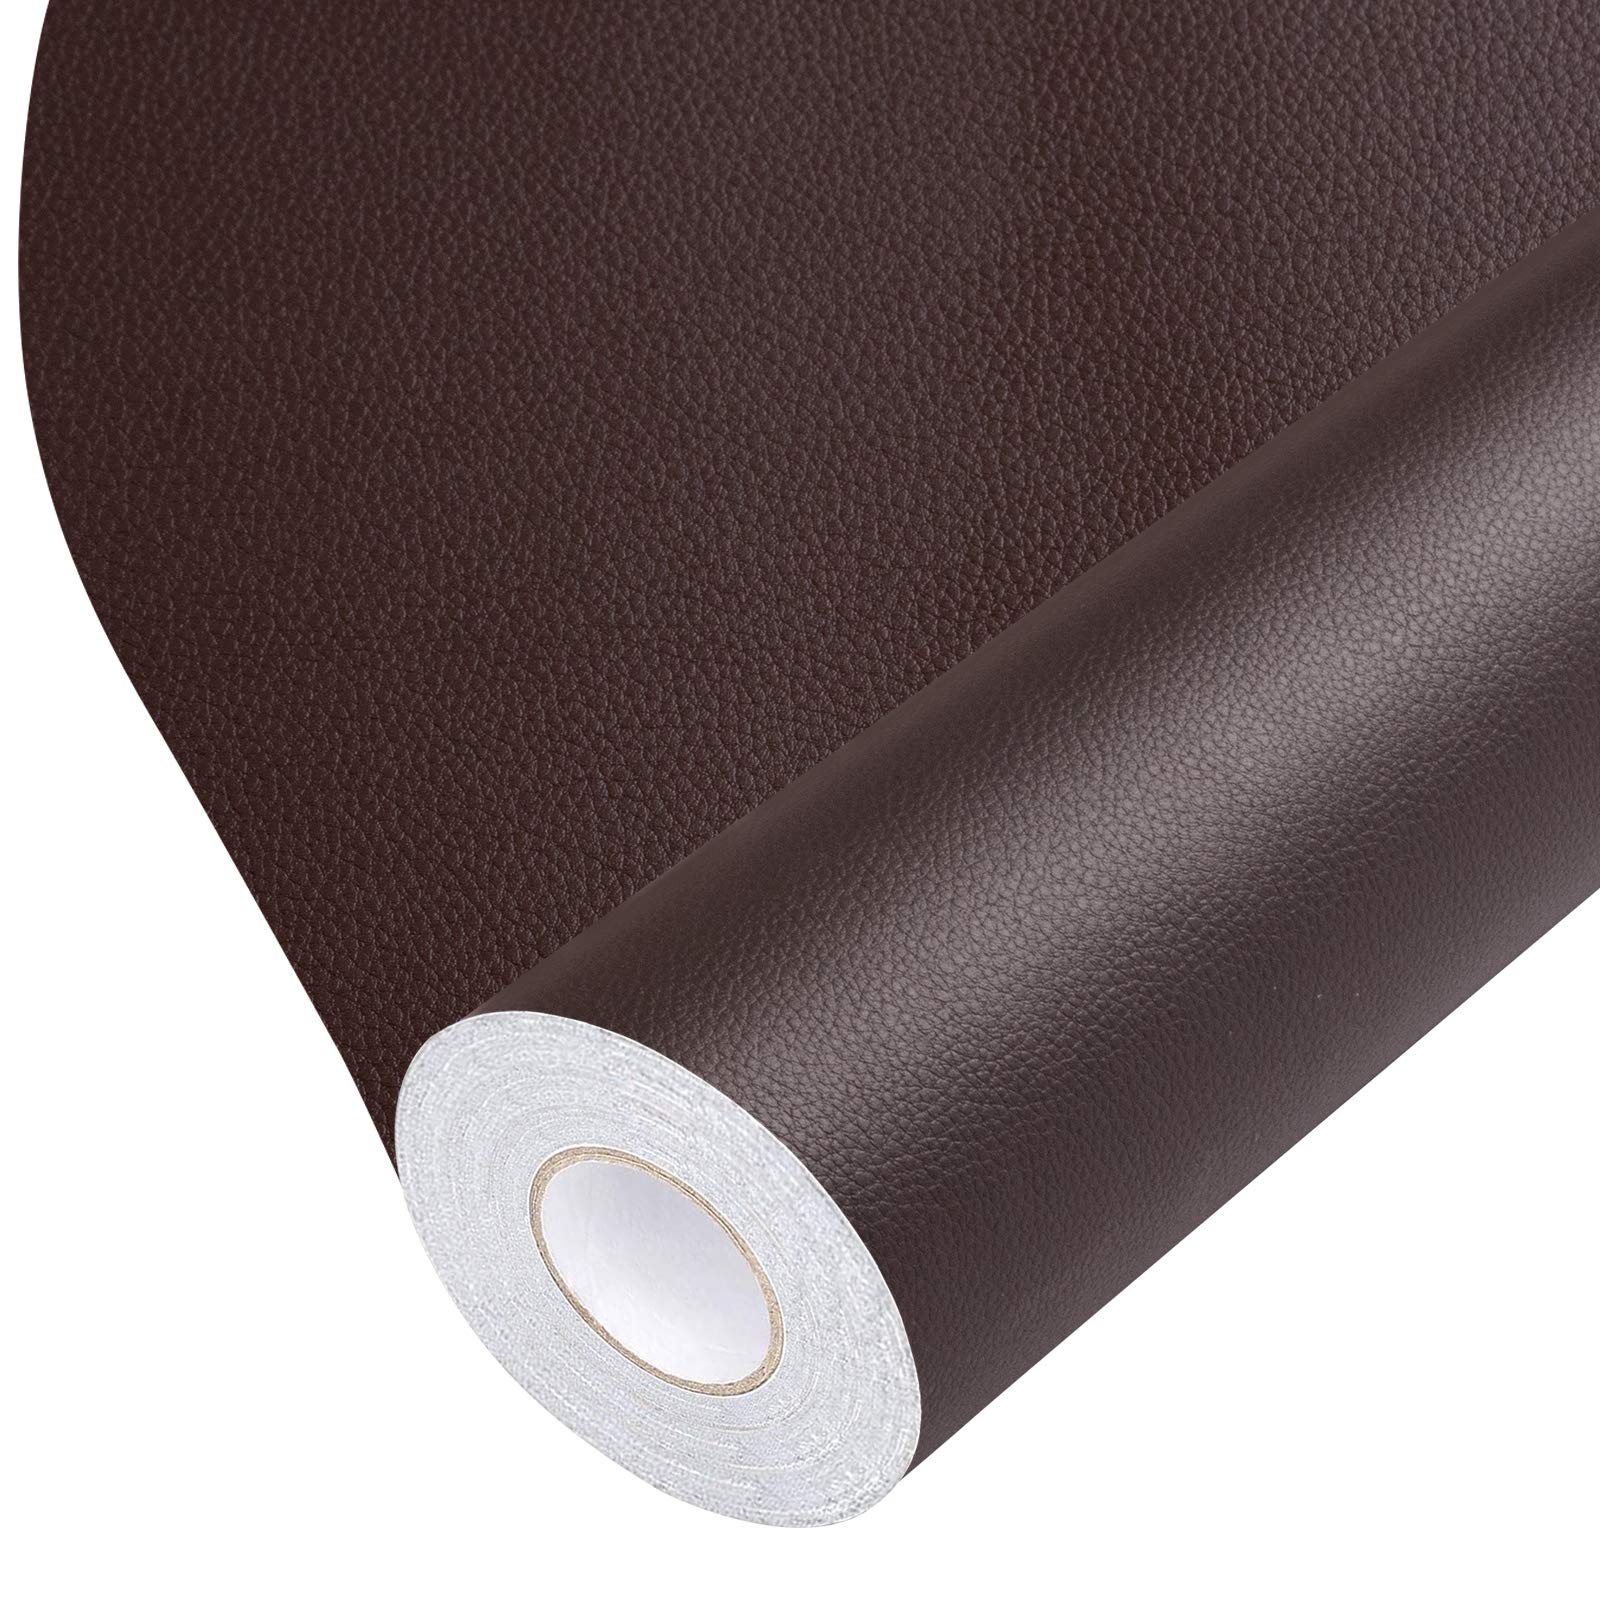 Self-Adhesive Patch Leather Repair Tape for Car Seats Couch Furniture  Upholstery